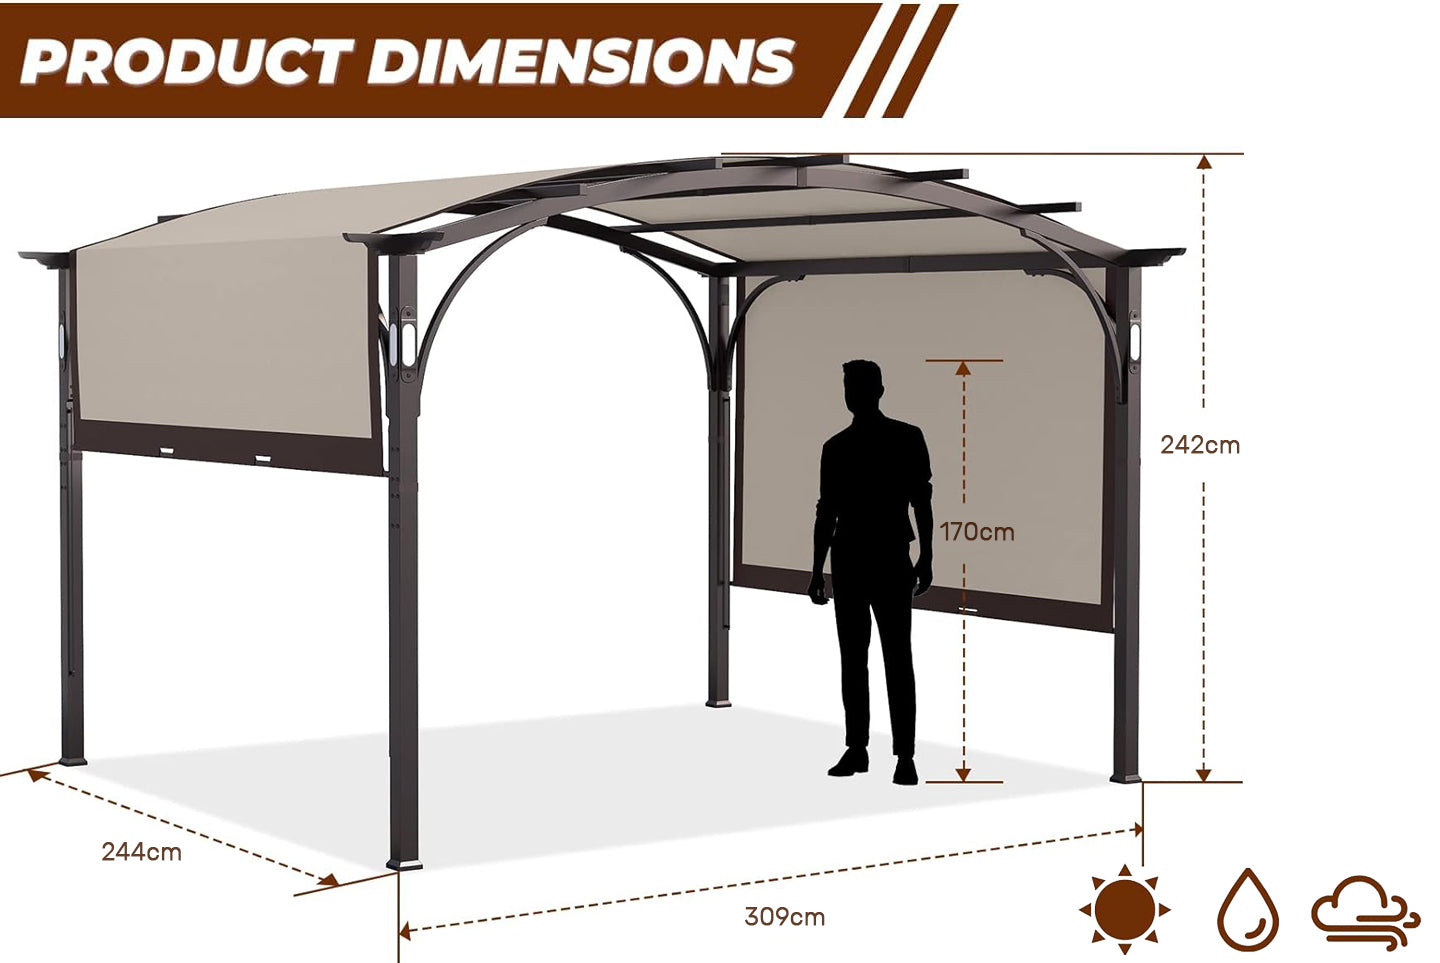 10' x 8' Metal Pergola Retractable Patio Gazebo Canopy Waterproof Sunshade with Bluetooth Speaker LED Light for Outdoor BBQ